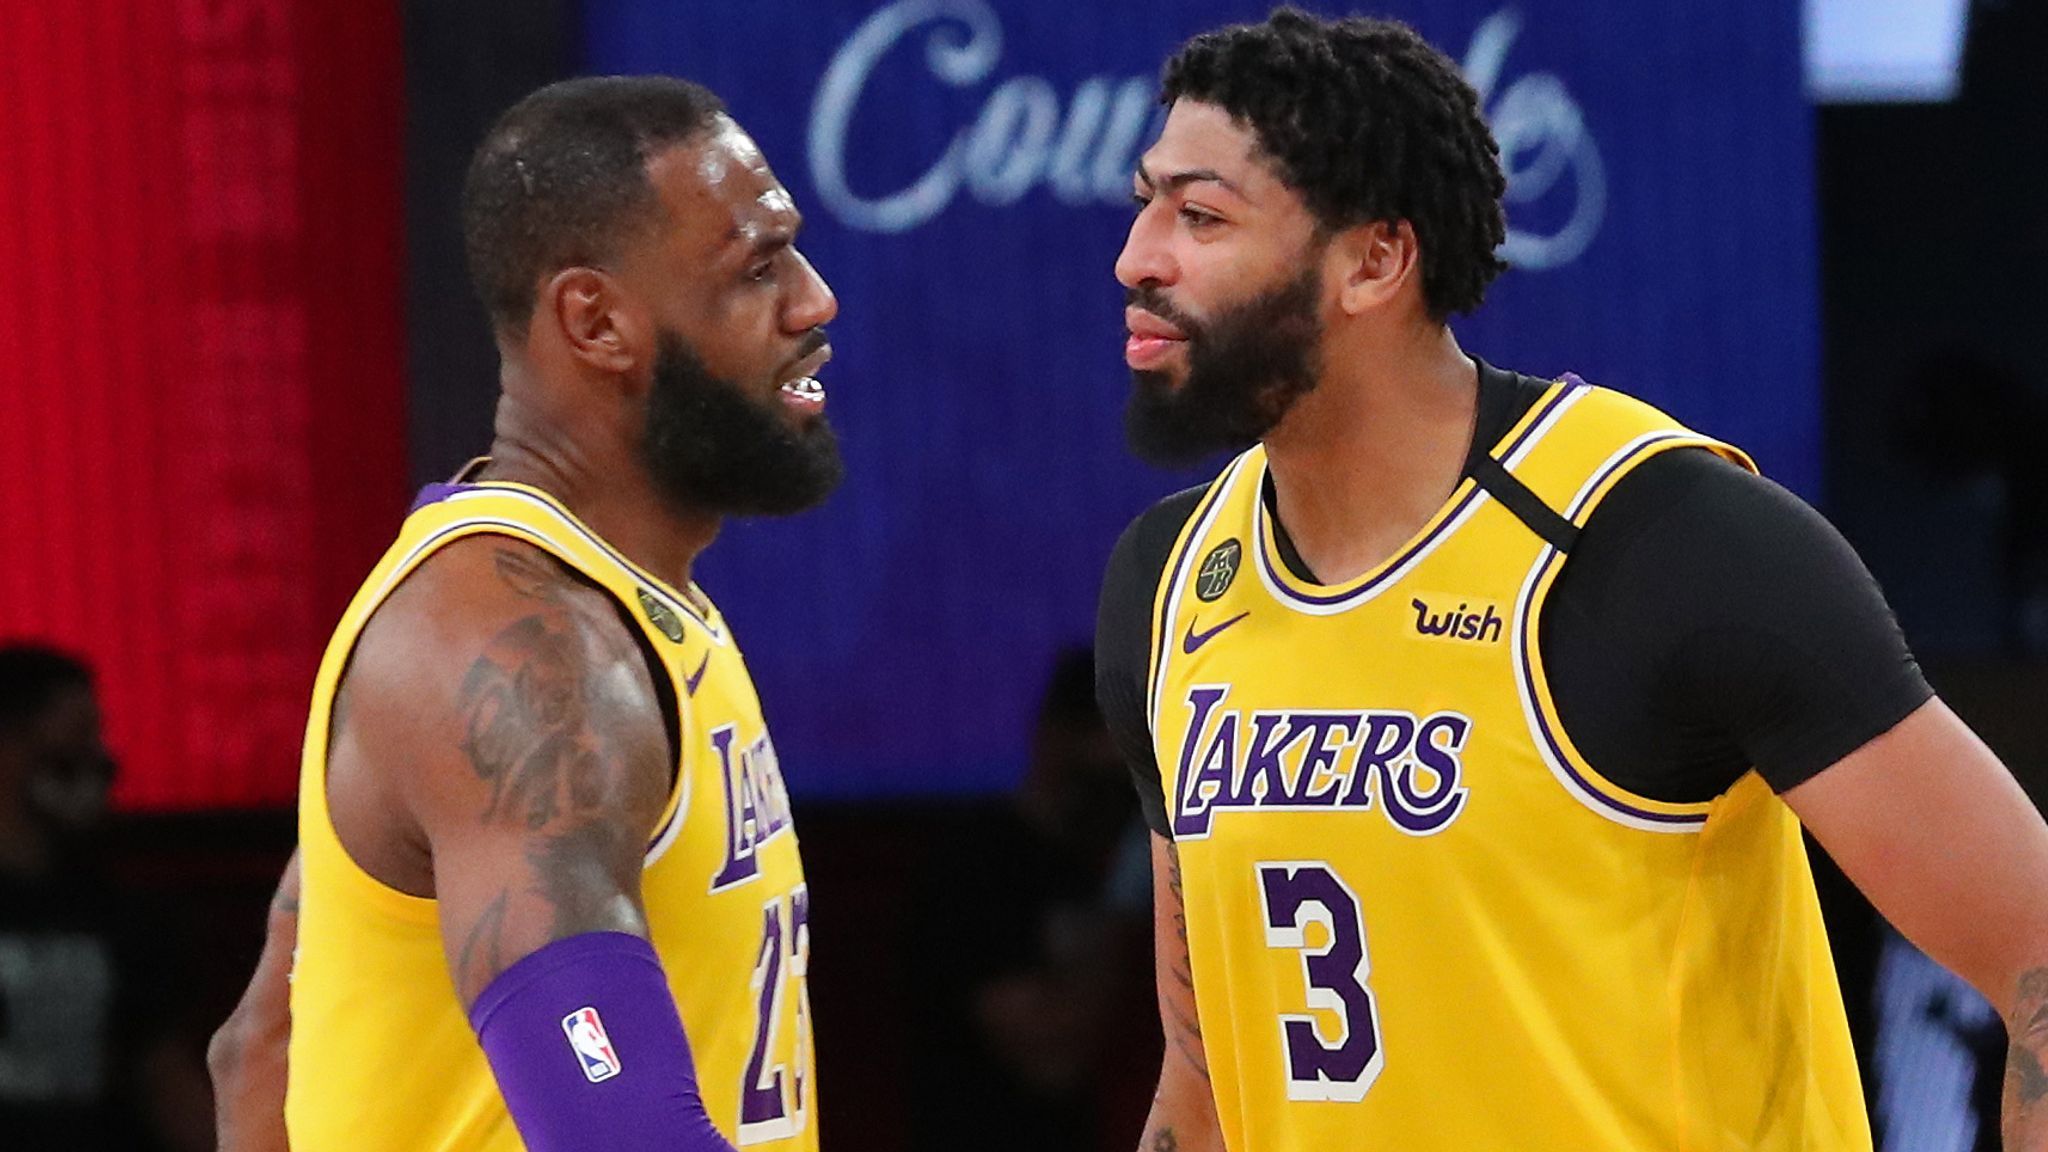 NBA Finals 2020: Ovie Soko says Los Angeles Lakers will lift NBA title